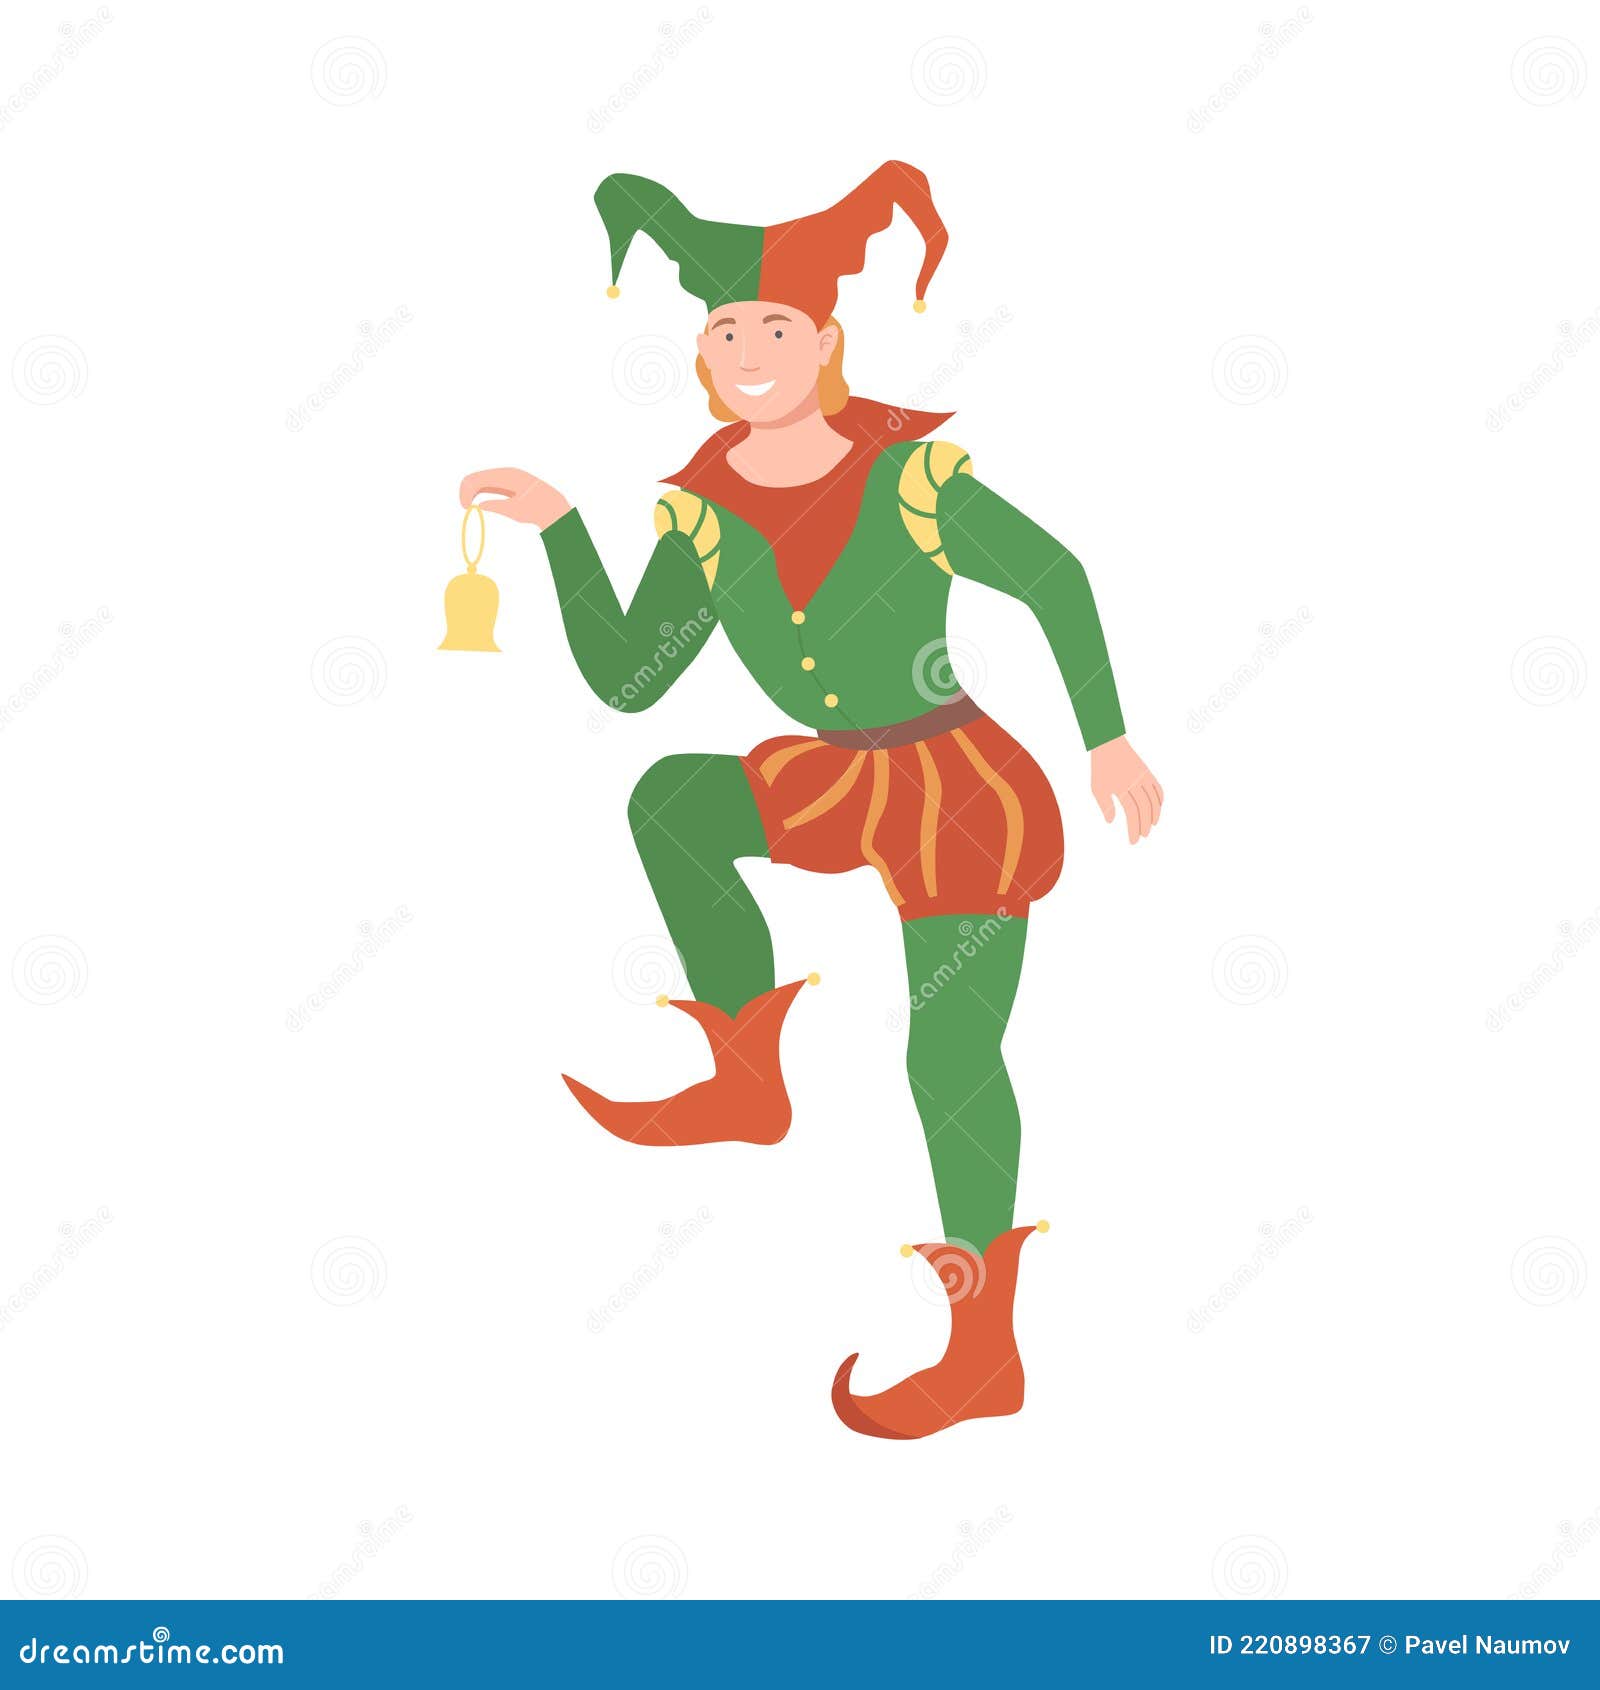 Jester or Harlequin with Jingle Hat As Fabulous Medieval Character from ...